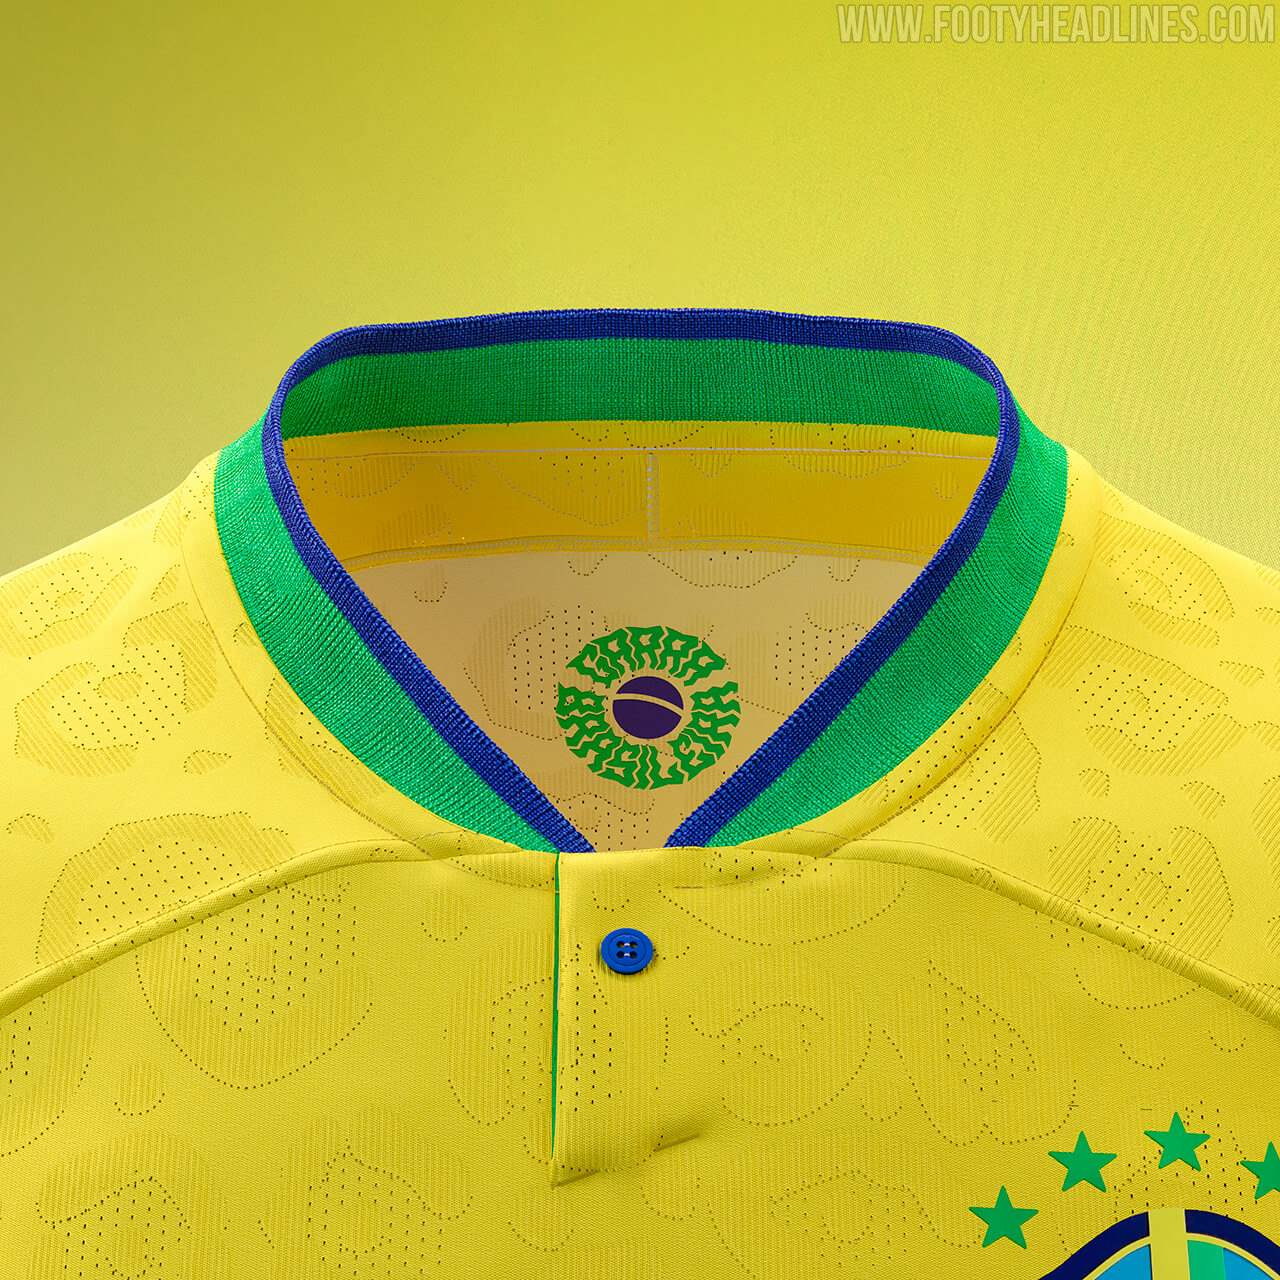 Nike Brazil 2022 World Cup Kit Features Amazing Collar Detail